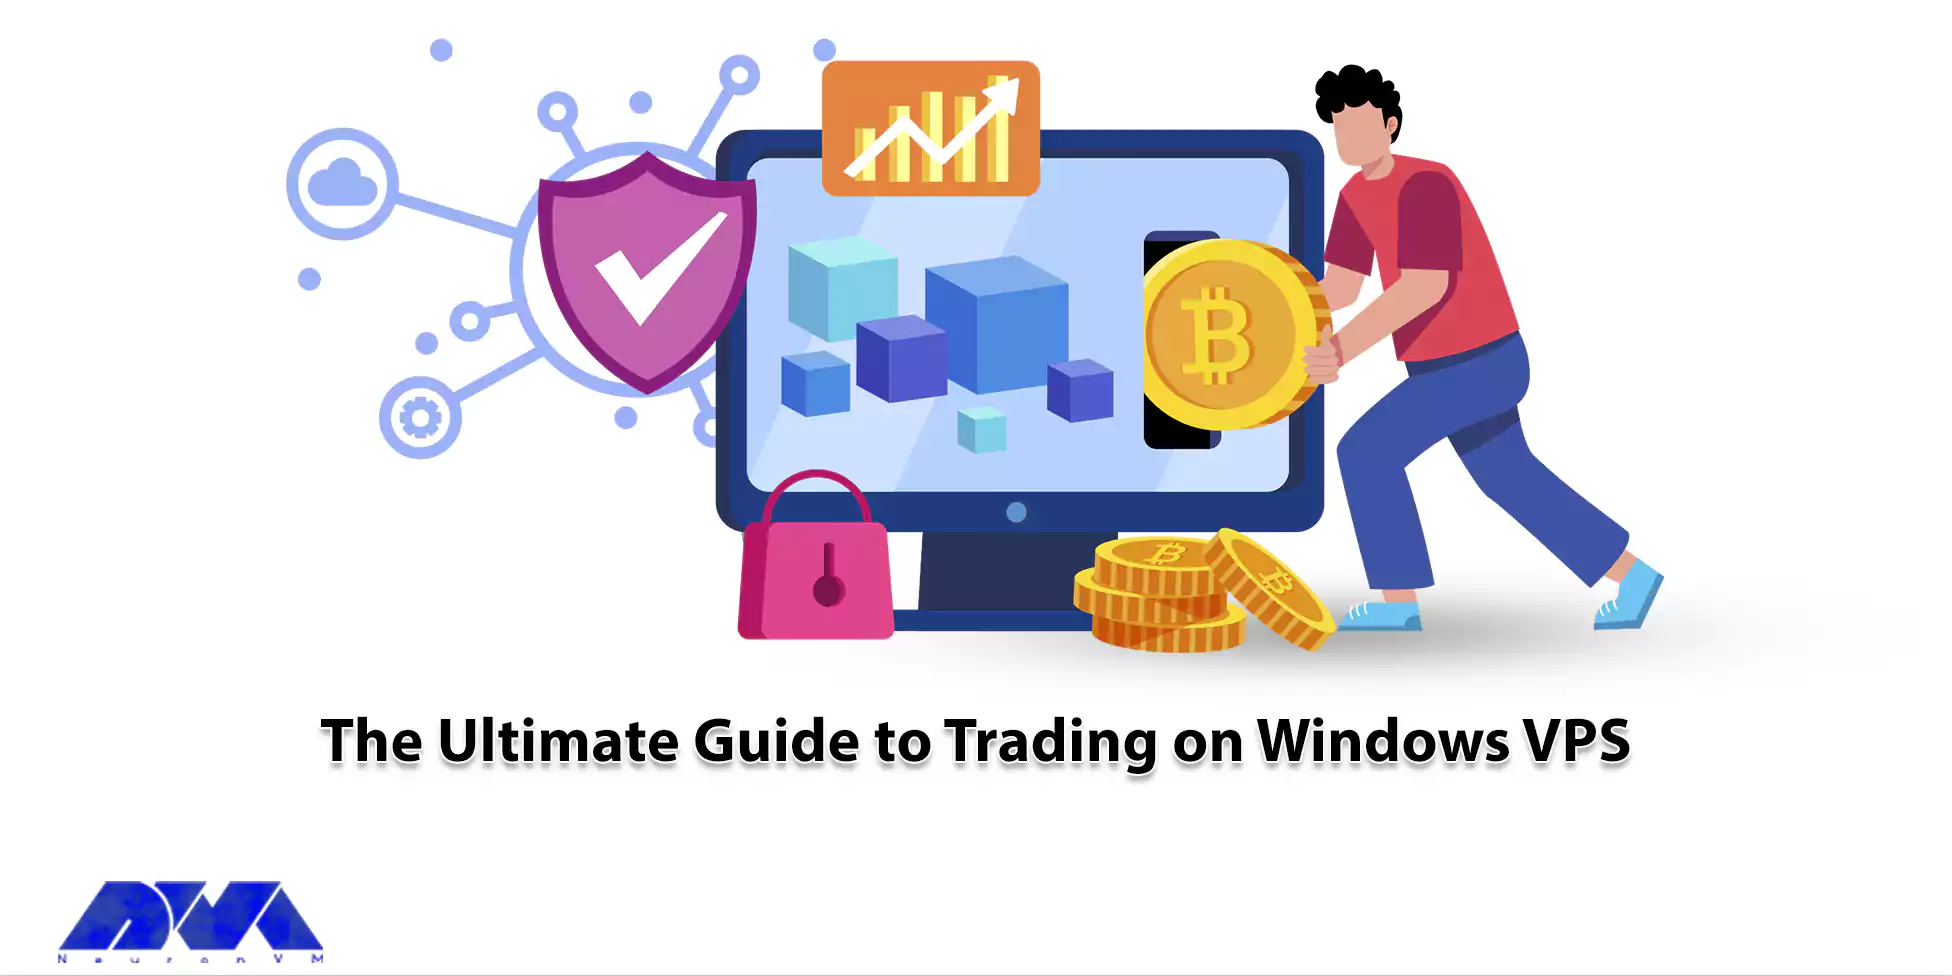 The Ultimate Guide to Trading on Windows VPS